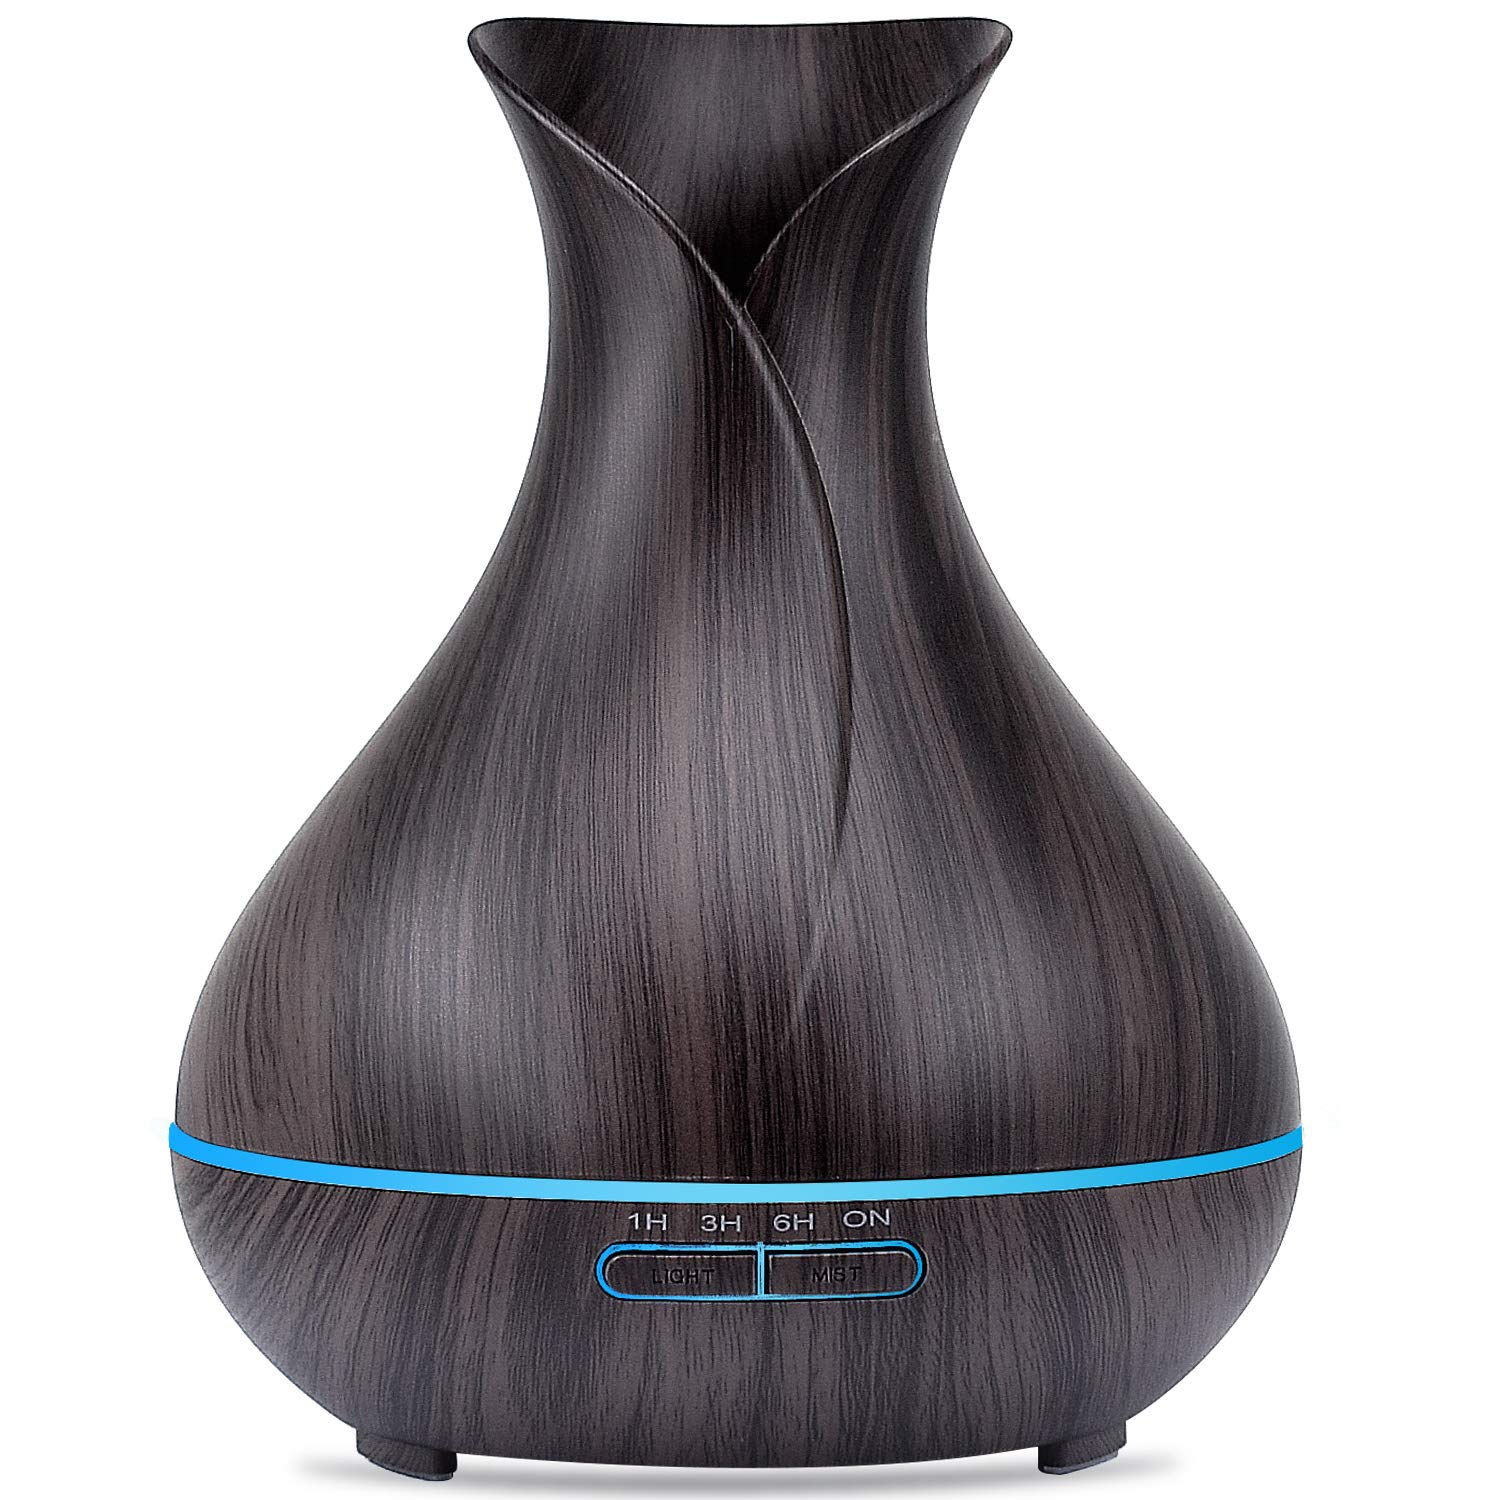 550ml Wood Grain Essential Oil Diffuser, Cool Mist Ultrasonic Humidifier with 7 LED Color Changing Light